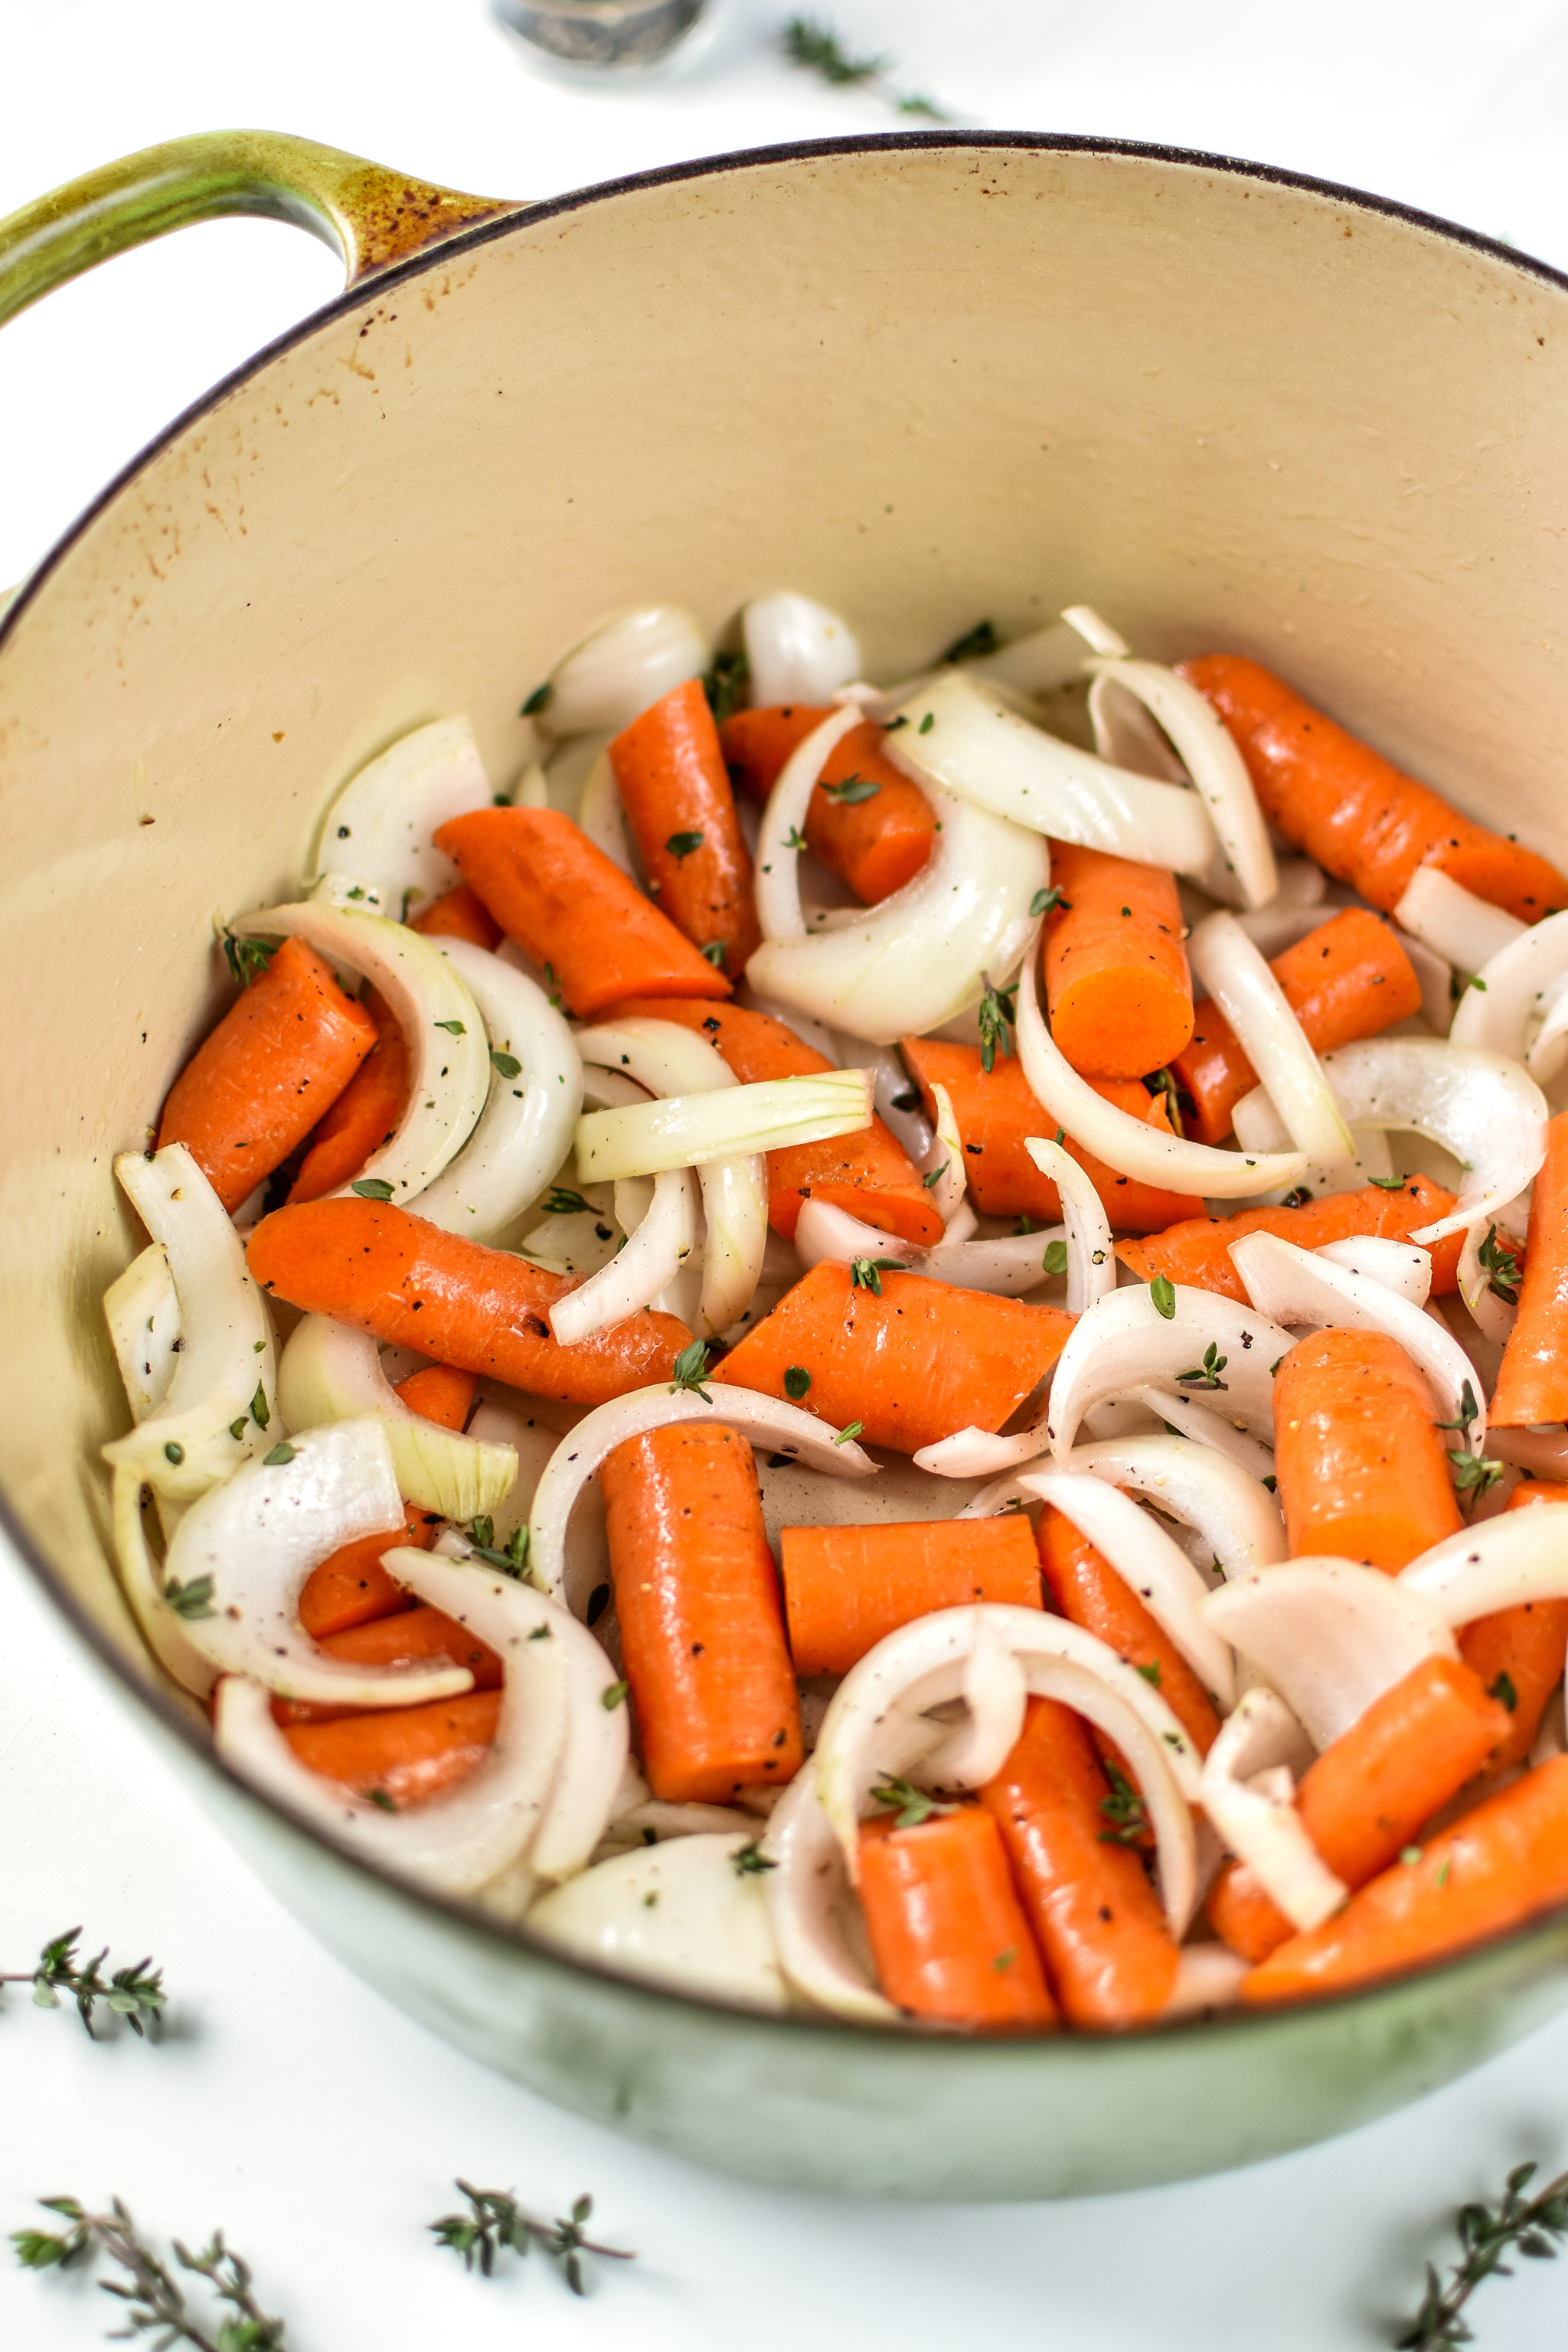 the roasting pan prepped with vegetables for the simple whole roast chicken